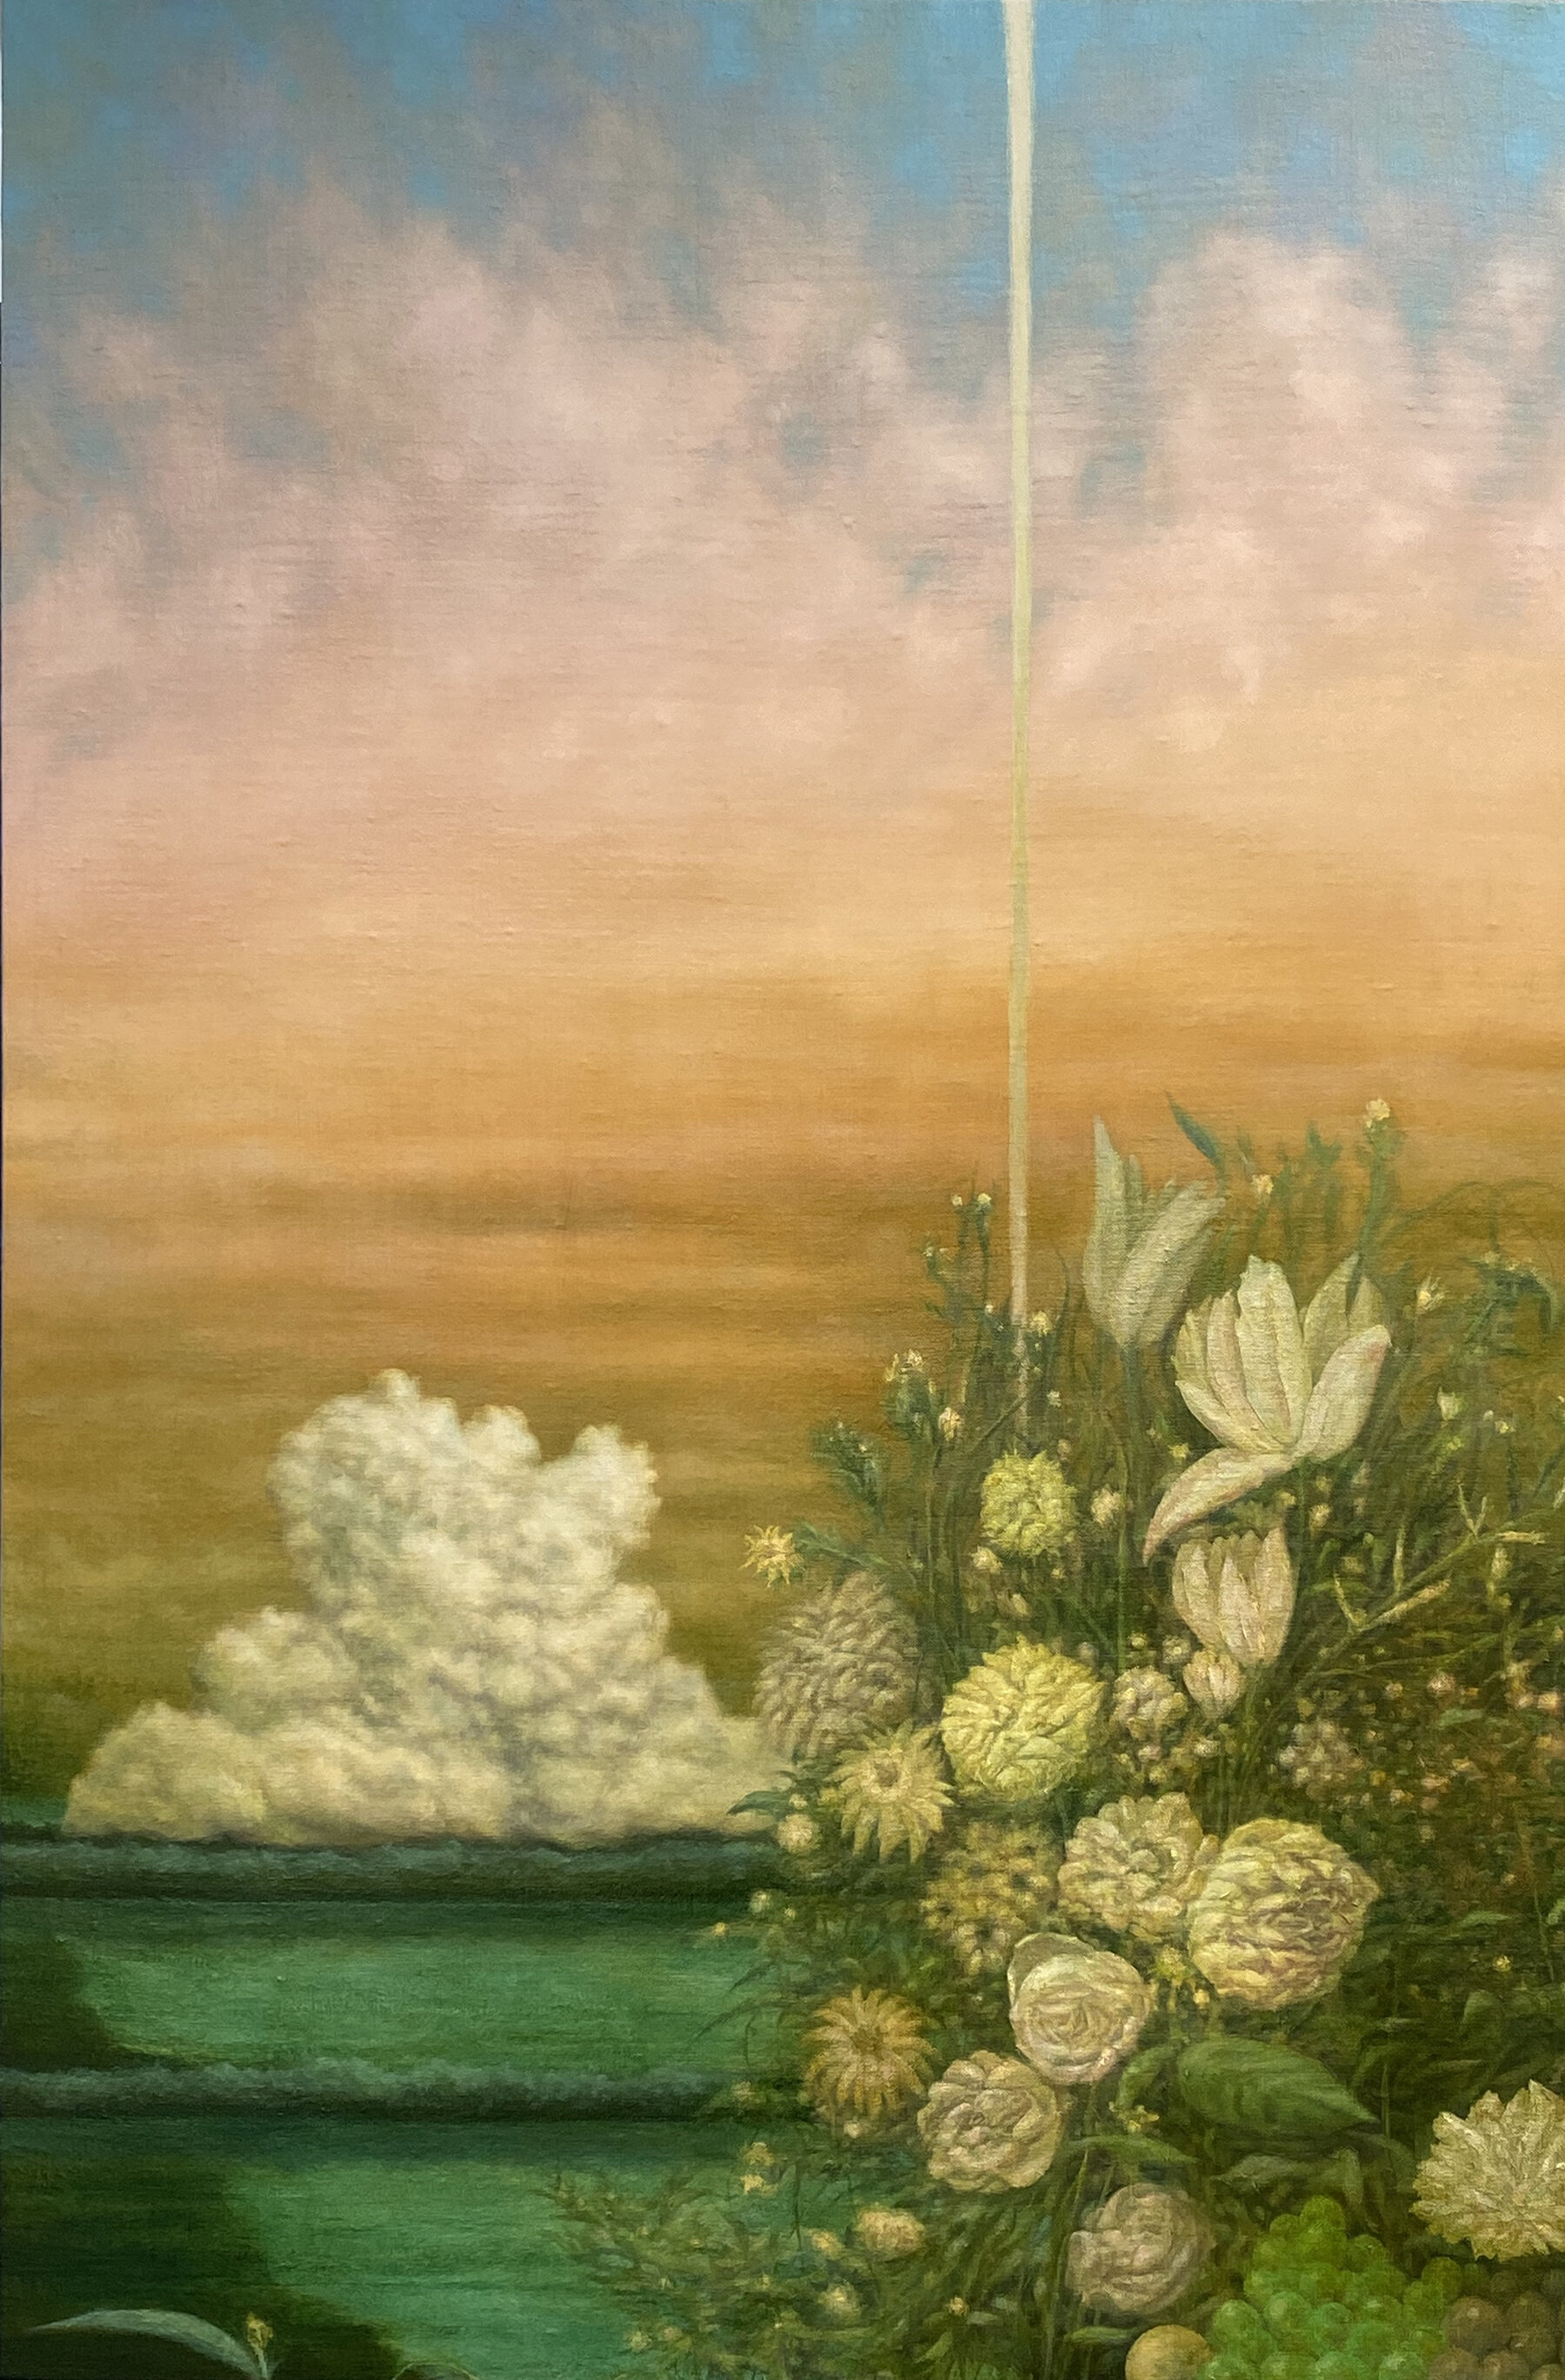 Falcon Heavy launch with Margareta Haverman’s Vase of Flowers, 24” x 36” oil + wax on linen over panel, 2019